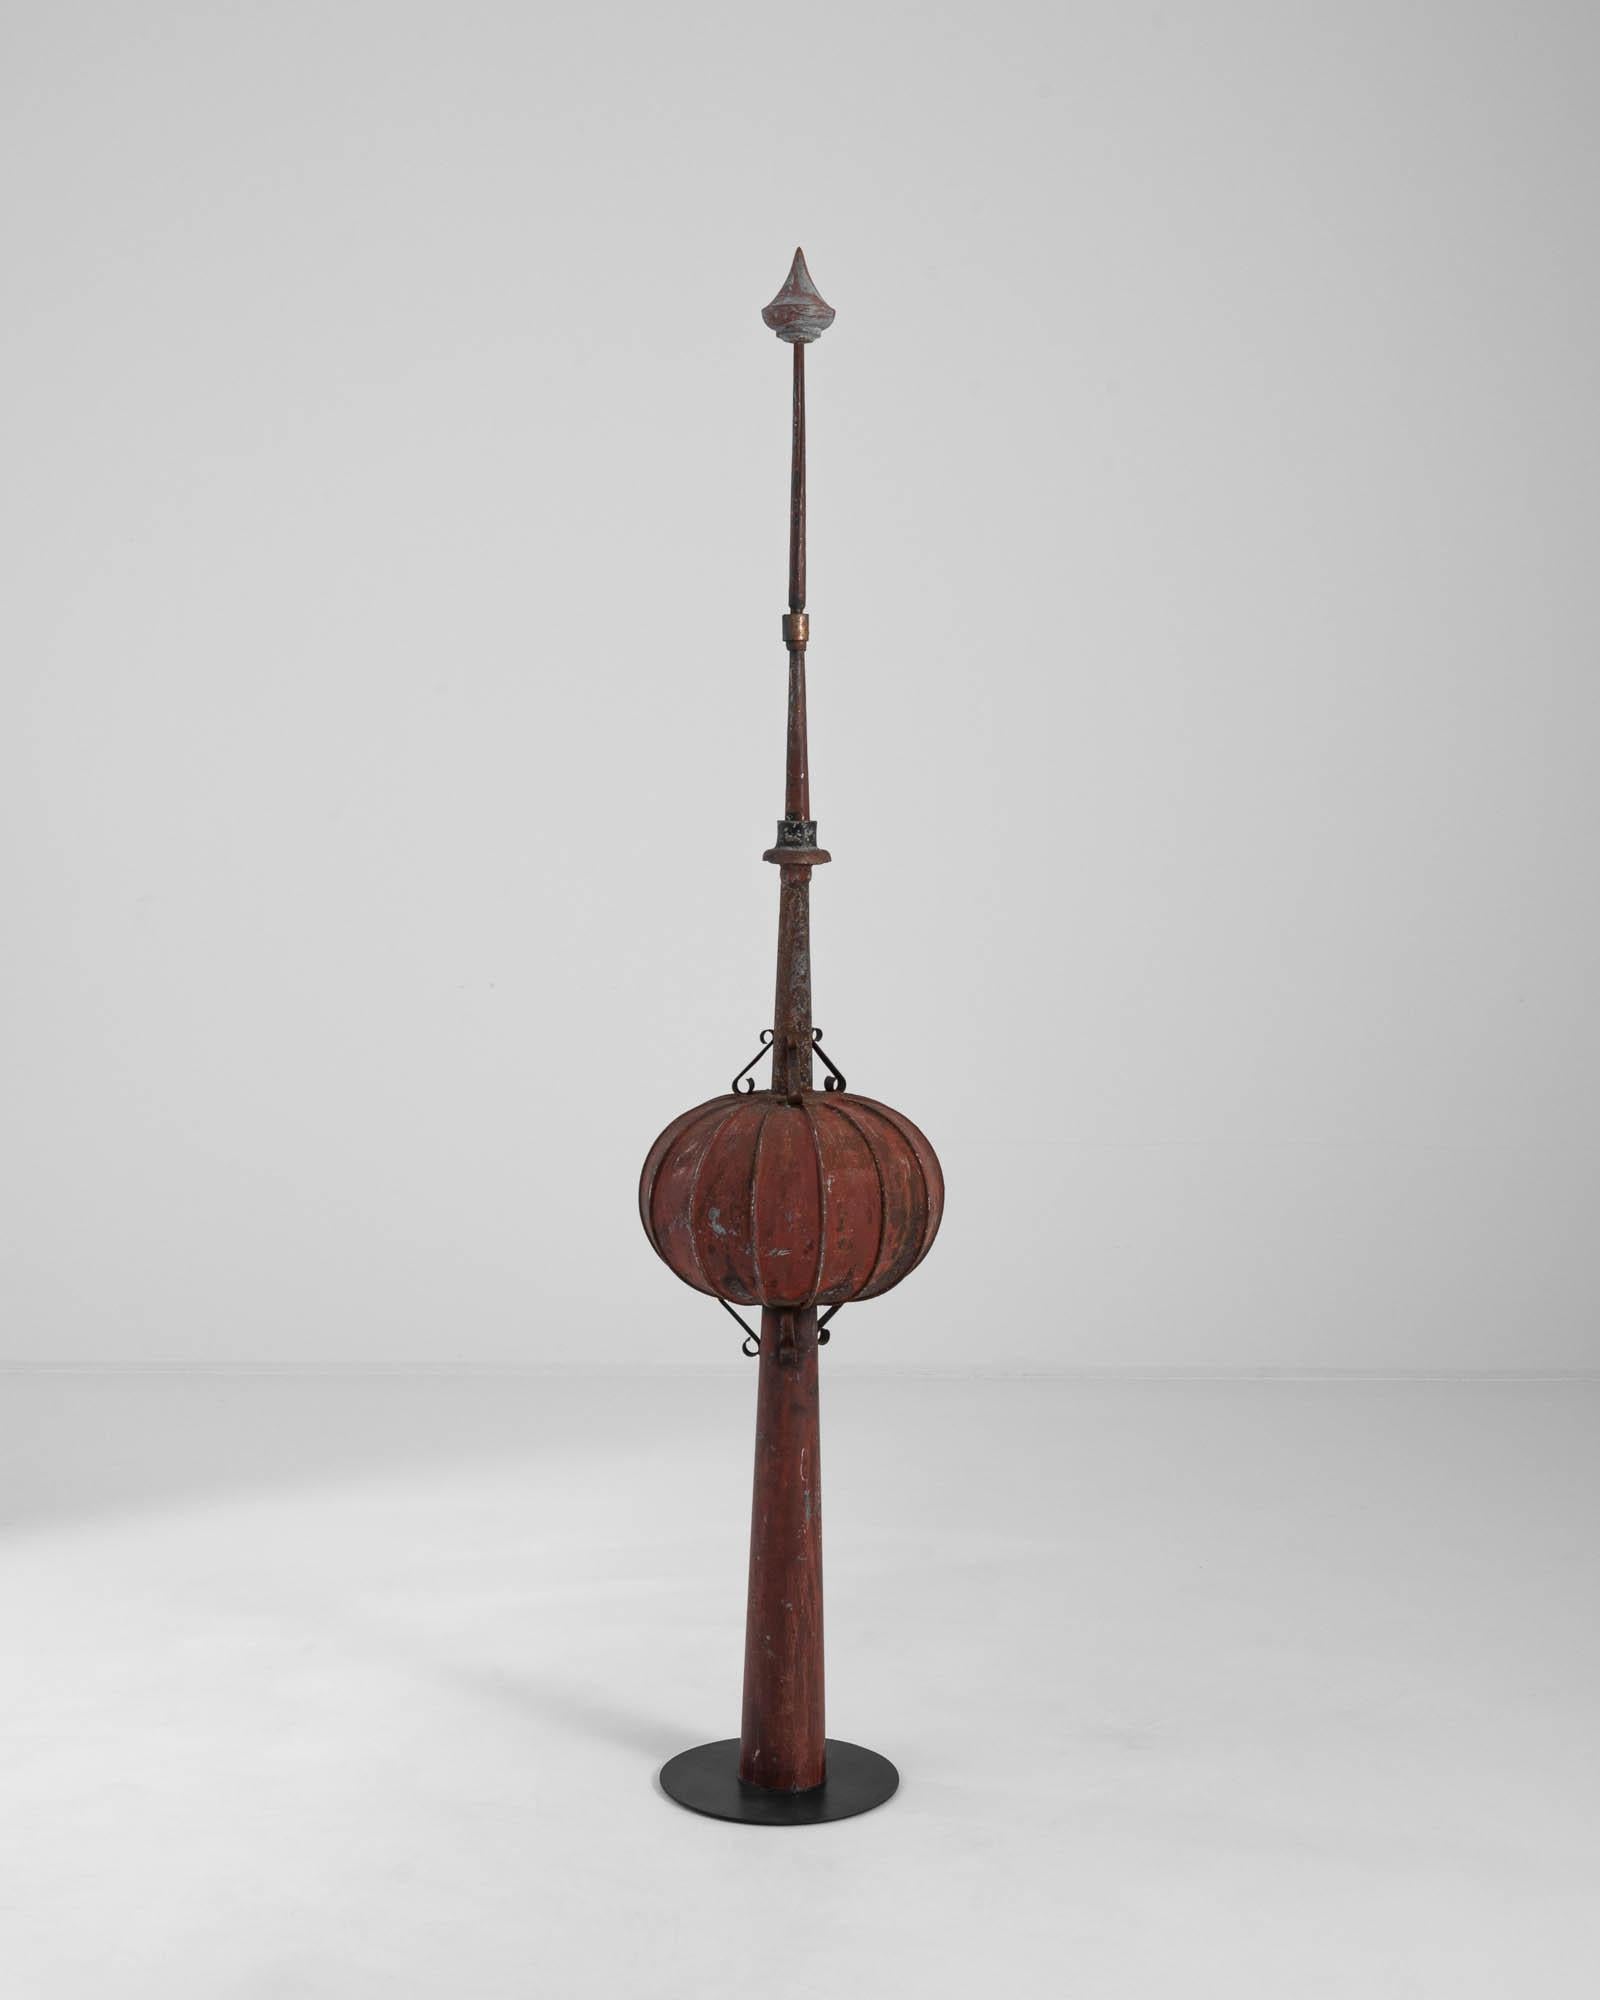 A metal weather vane created in 19th century Scandinavia. Resembling a spear-like pillar punctuated by a pumpkin shaped accent and an equestrian pendant, this Scandinavian totem formerly served as a functional architectural accent, pointing the